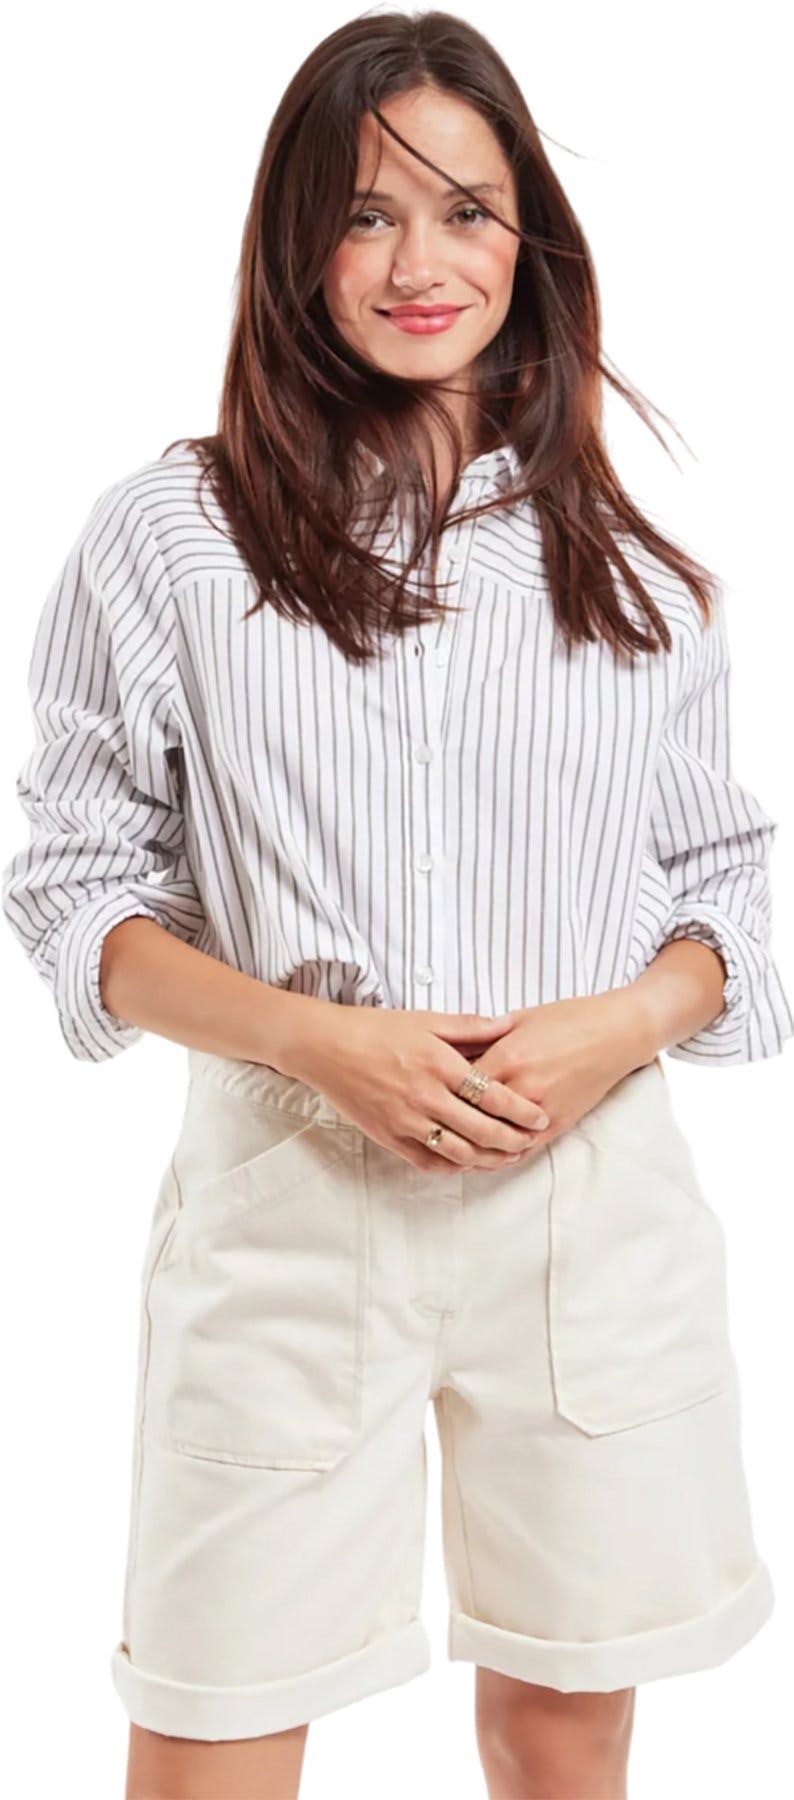 Product image for Cotton and Linen Striped Shirt - Women's